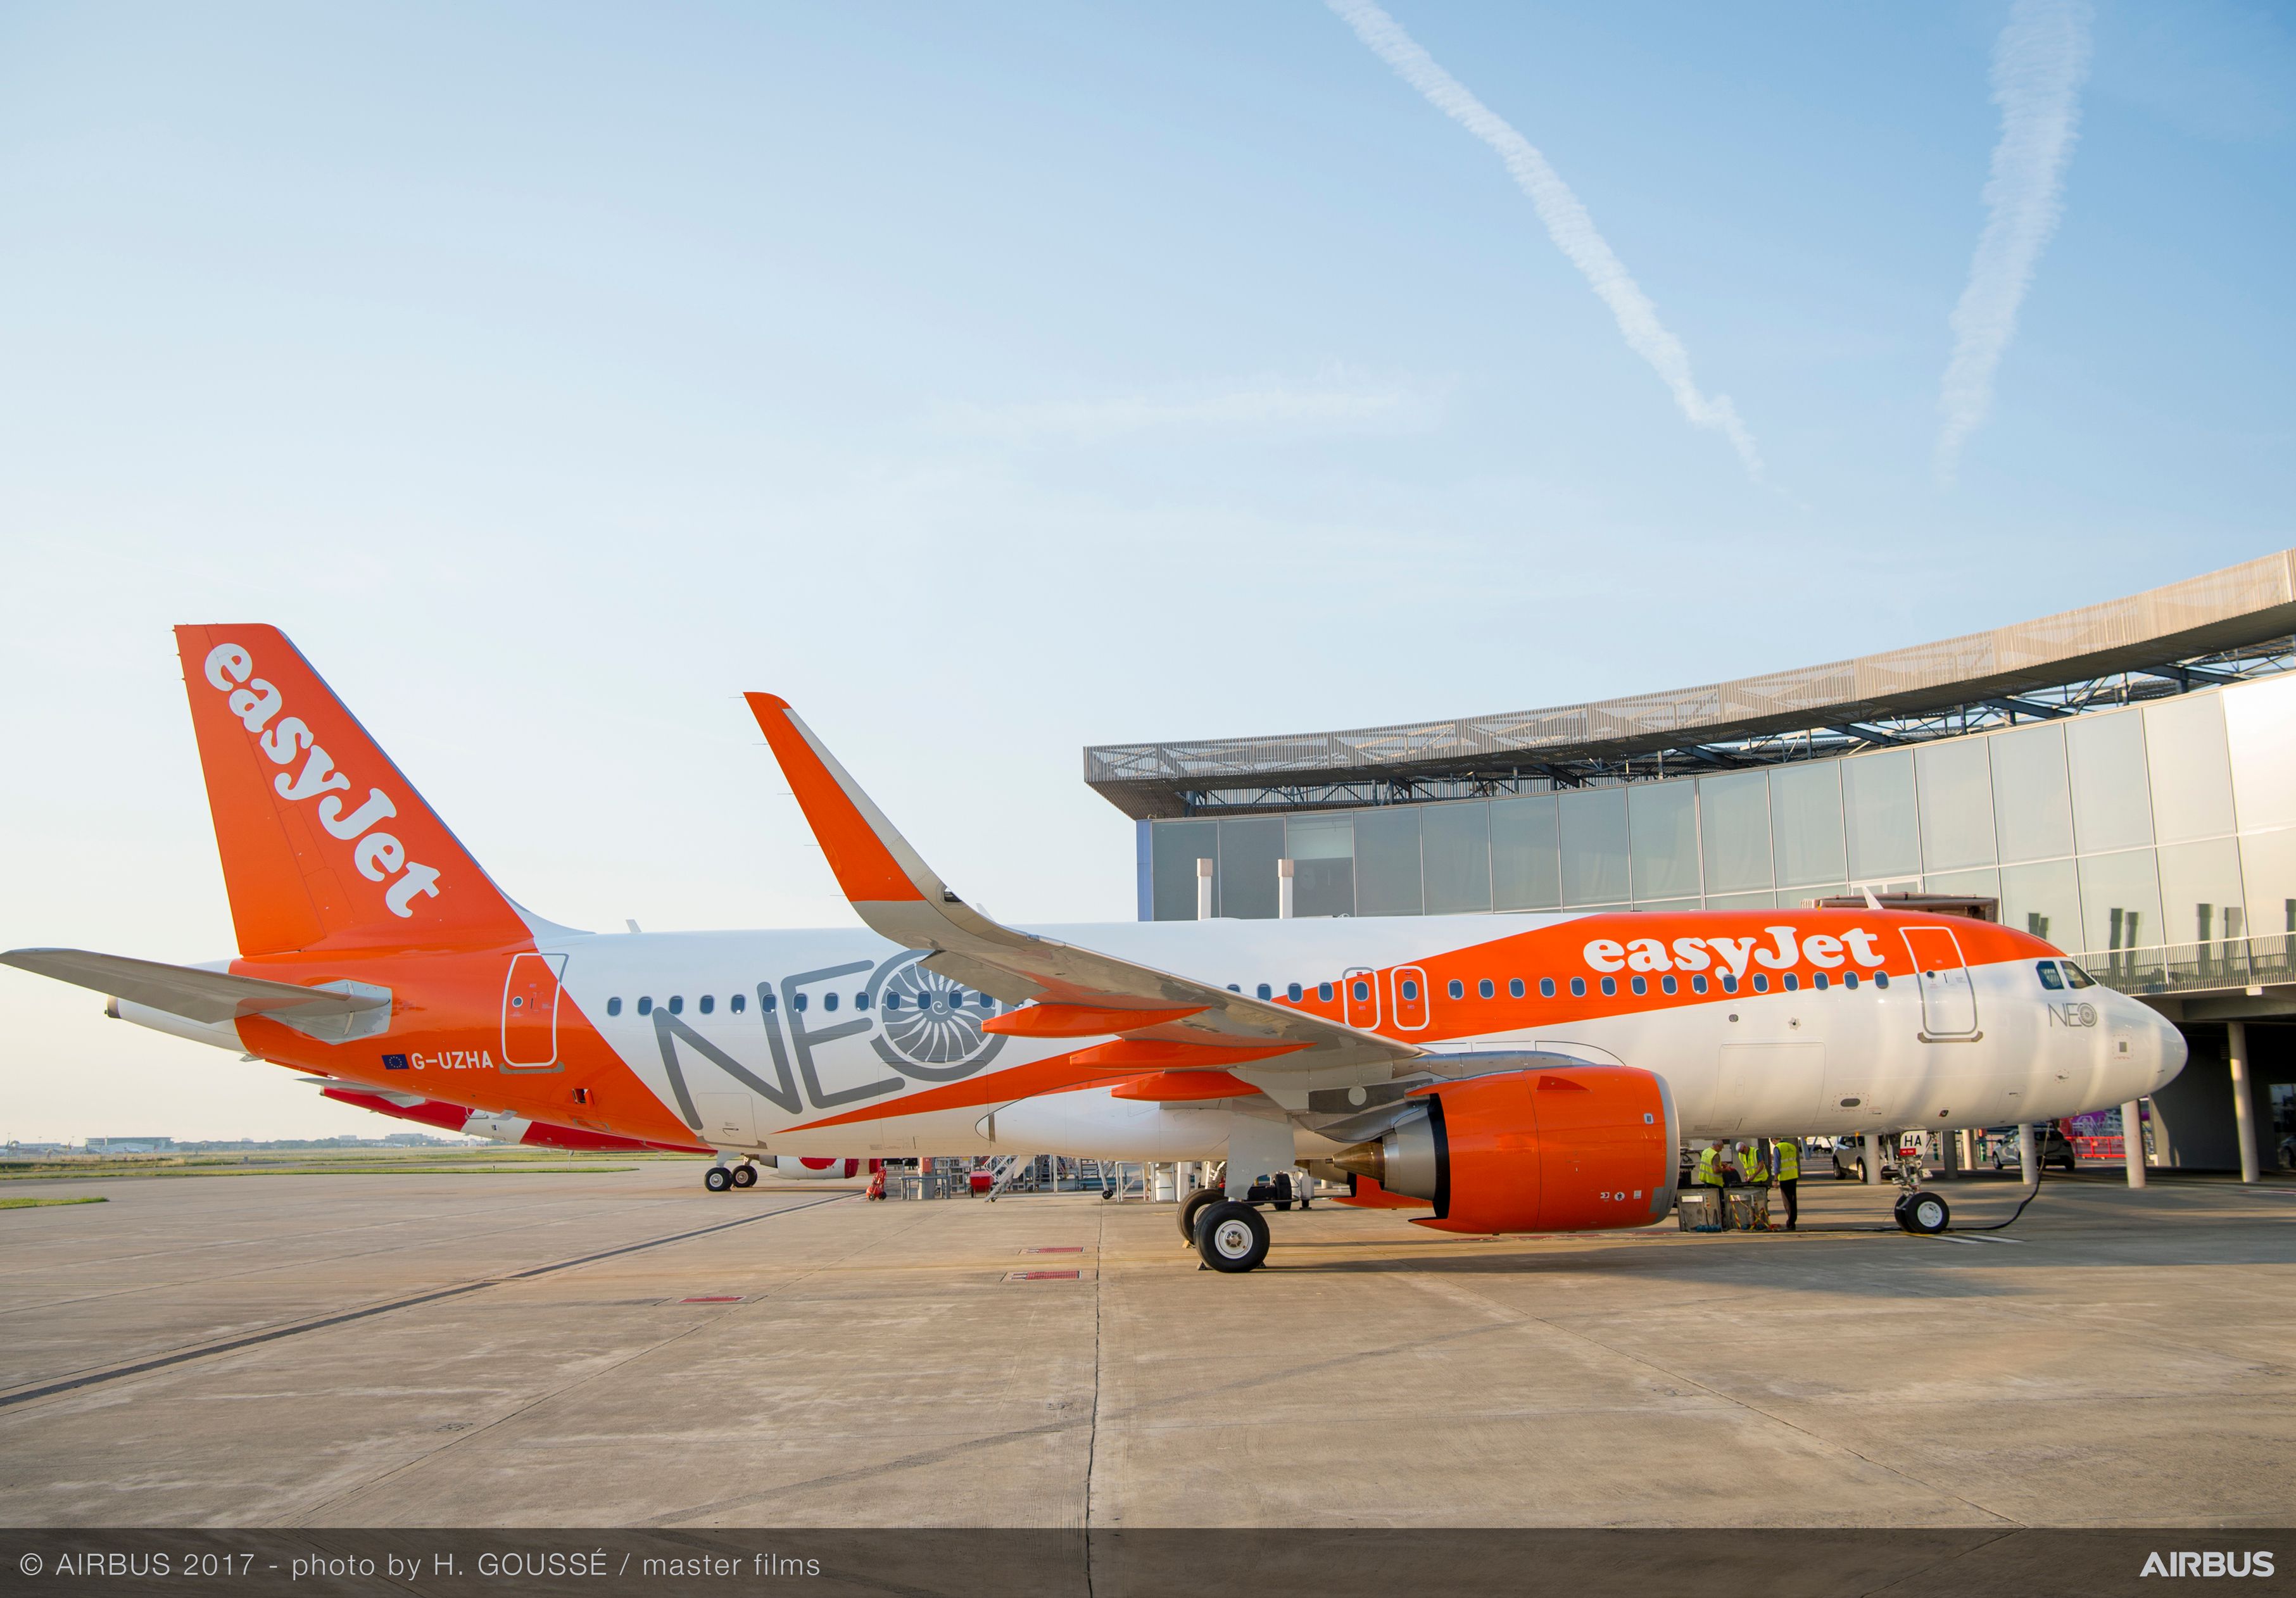 easyJet A320neo aircraft standing by terminal